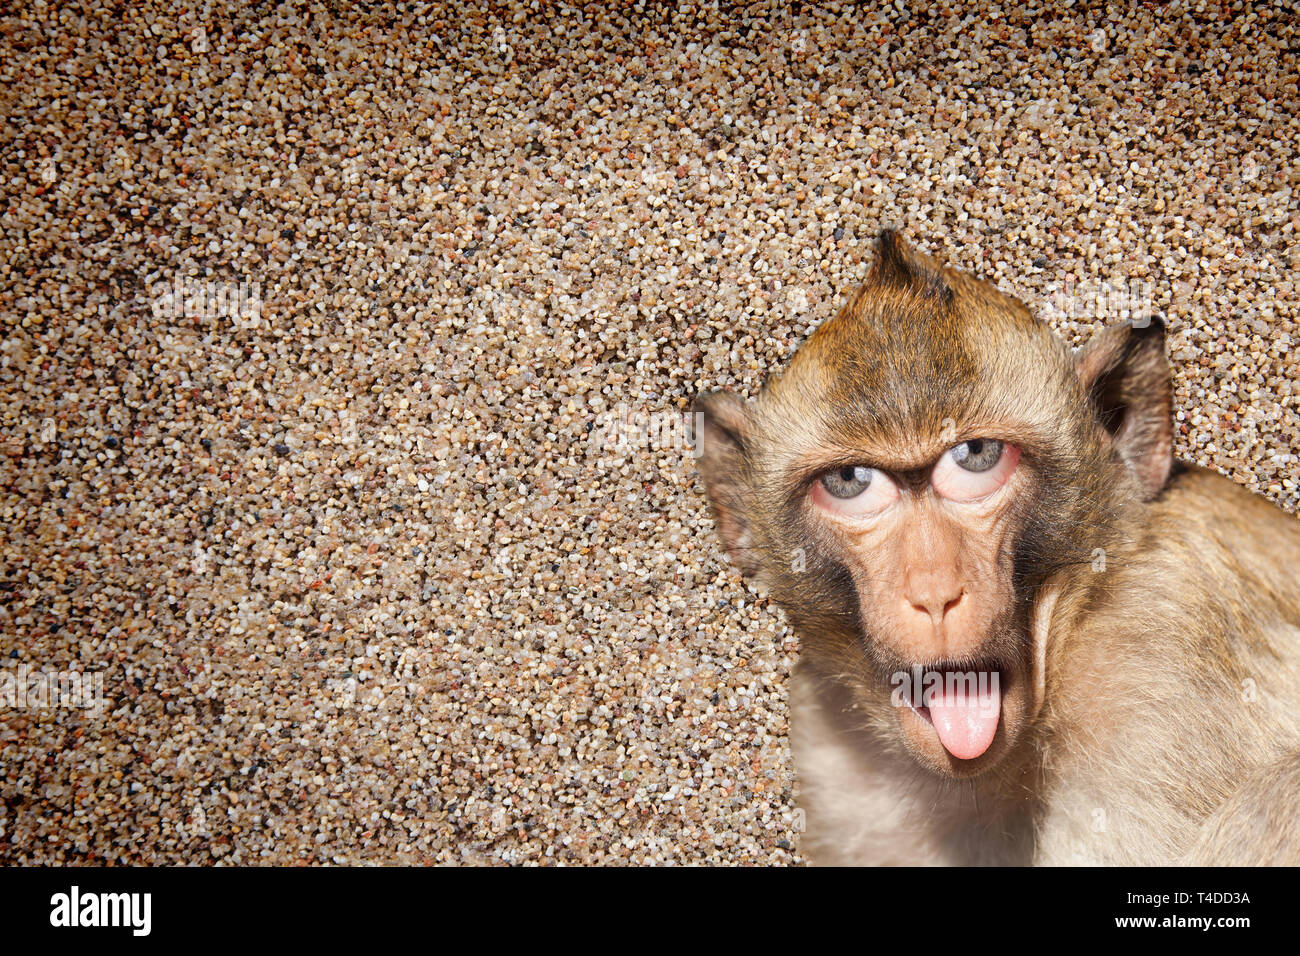 Rhesus monkey with his tongue sticking out, with human eyes and gray wall in the background - Photoshop Composing Stock Photo